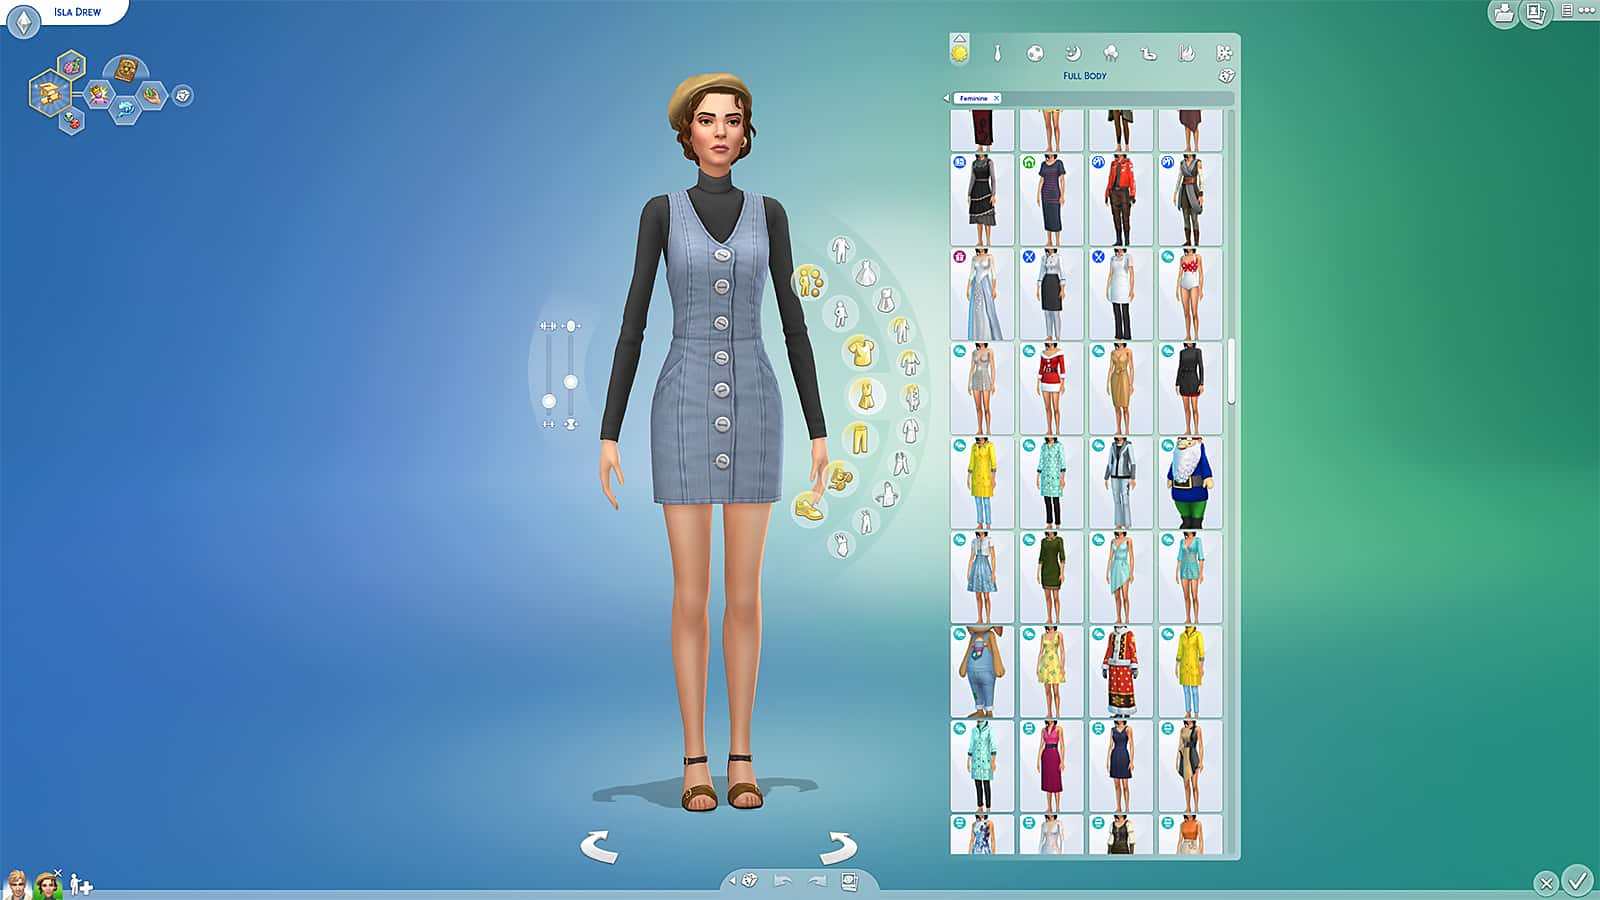 35+ Essential Sims 4 CC Packs You Need in Your Game - Must Have Mods